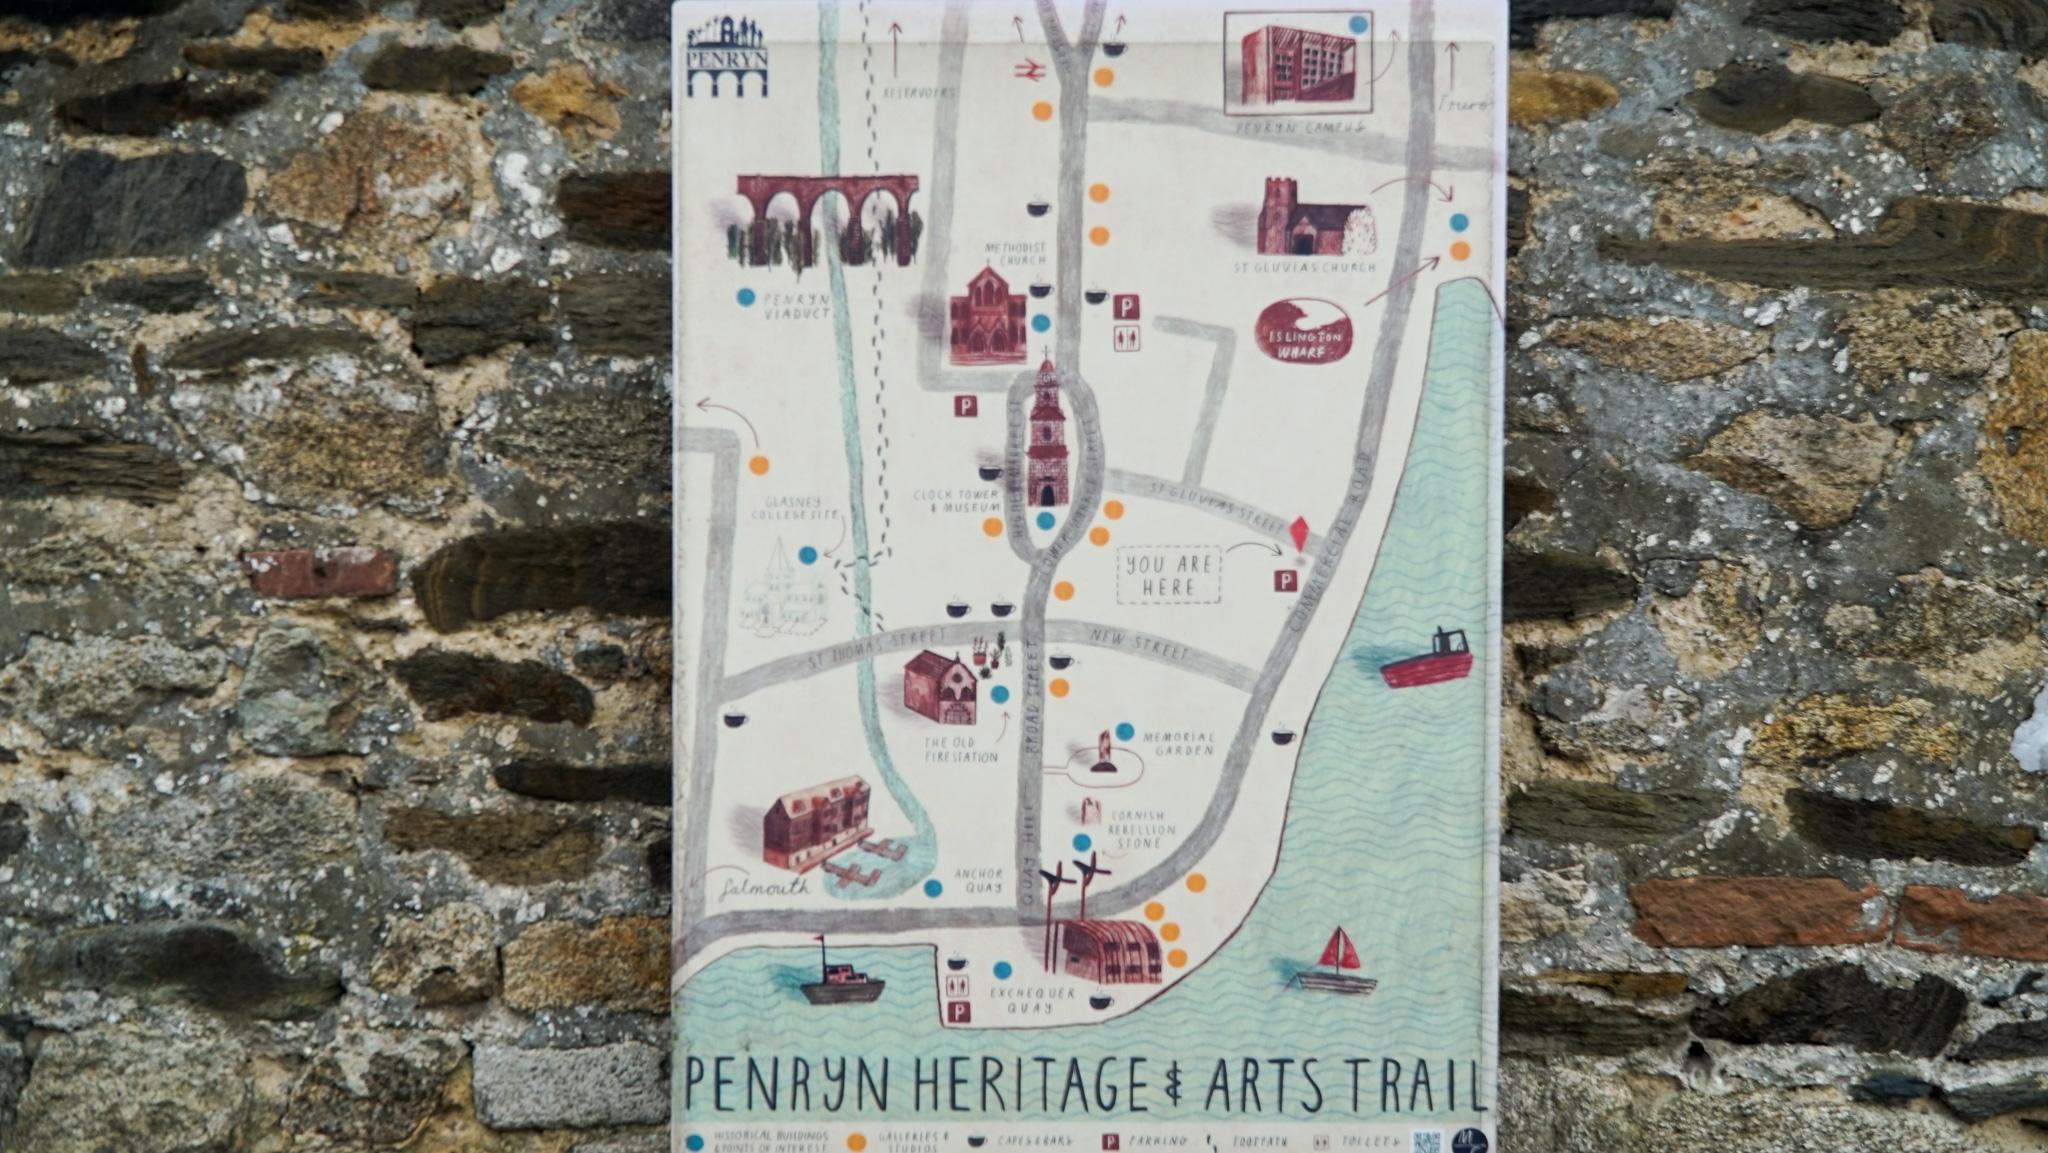 Penryn heritage tour sign and map